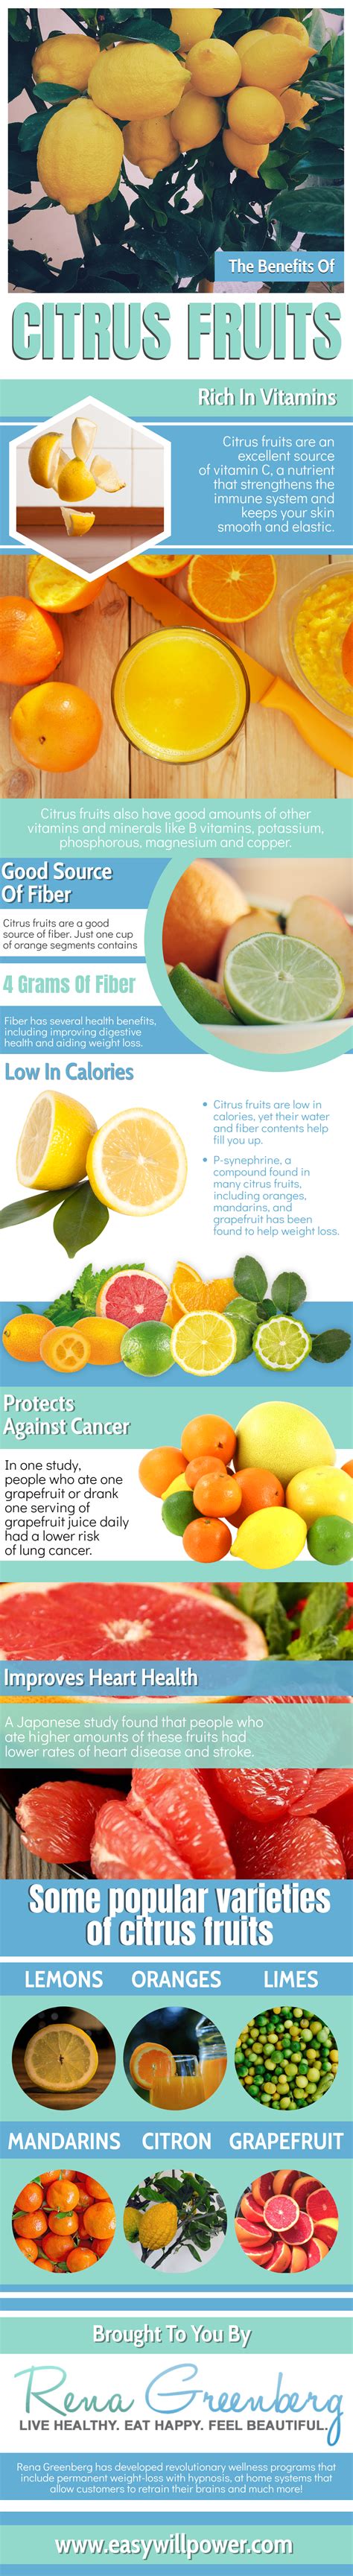 22 Useful Infographics About Citrus Fruits